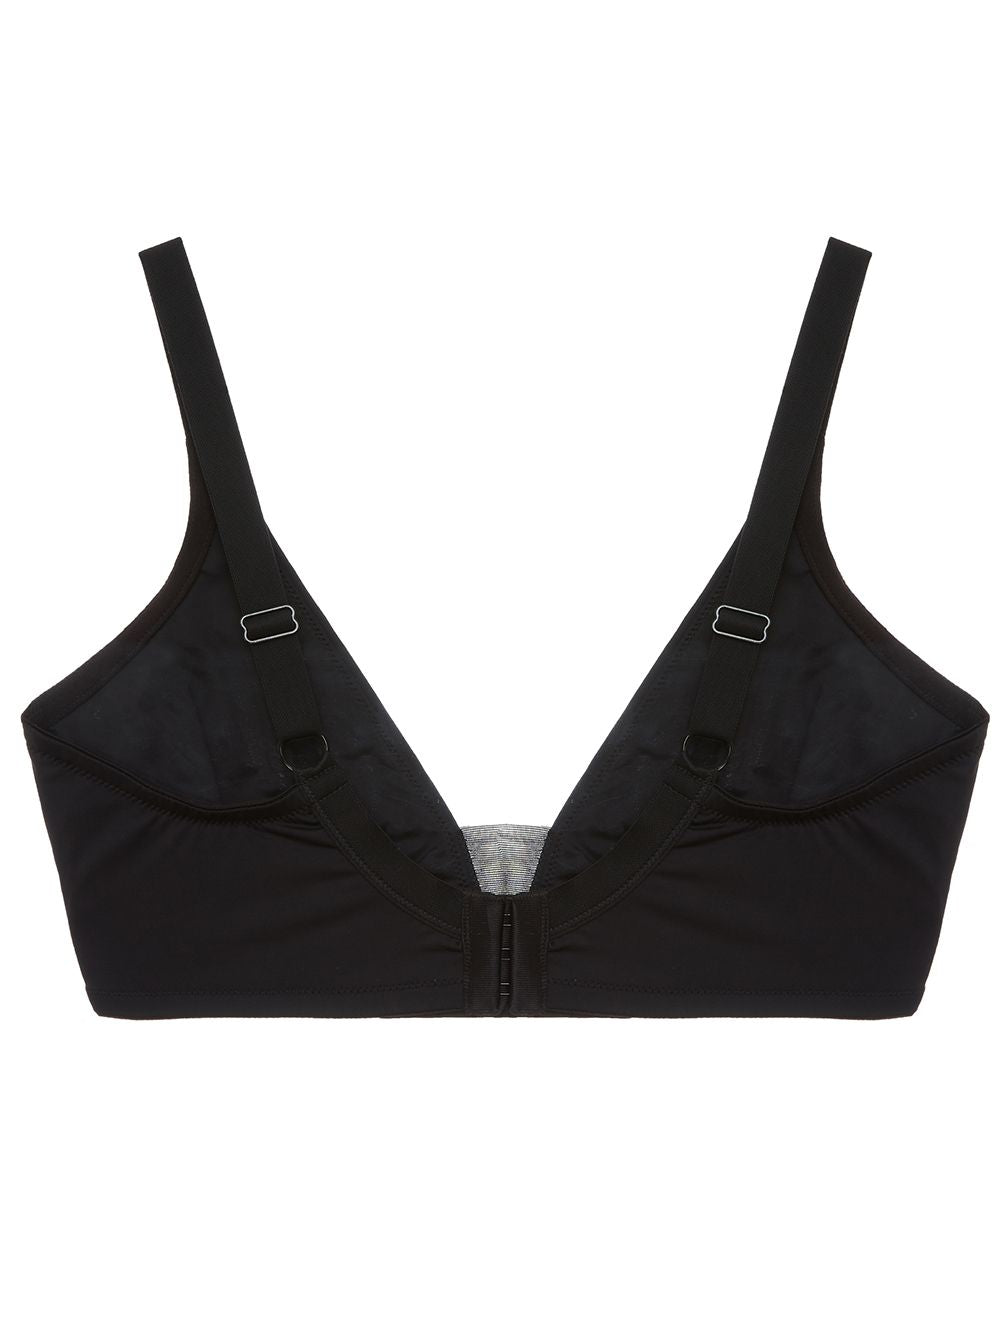 Elastic at bust for comfort and support Bra